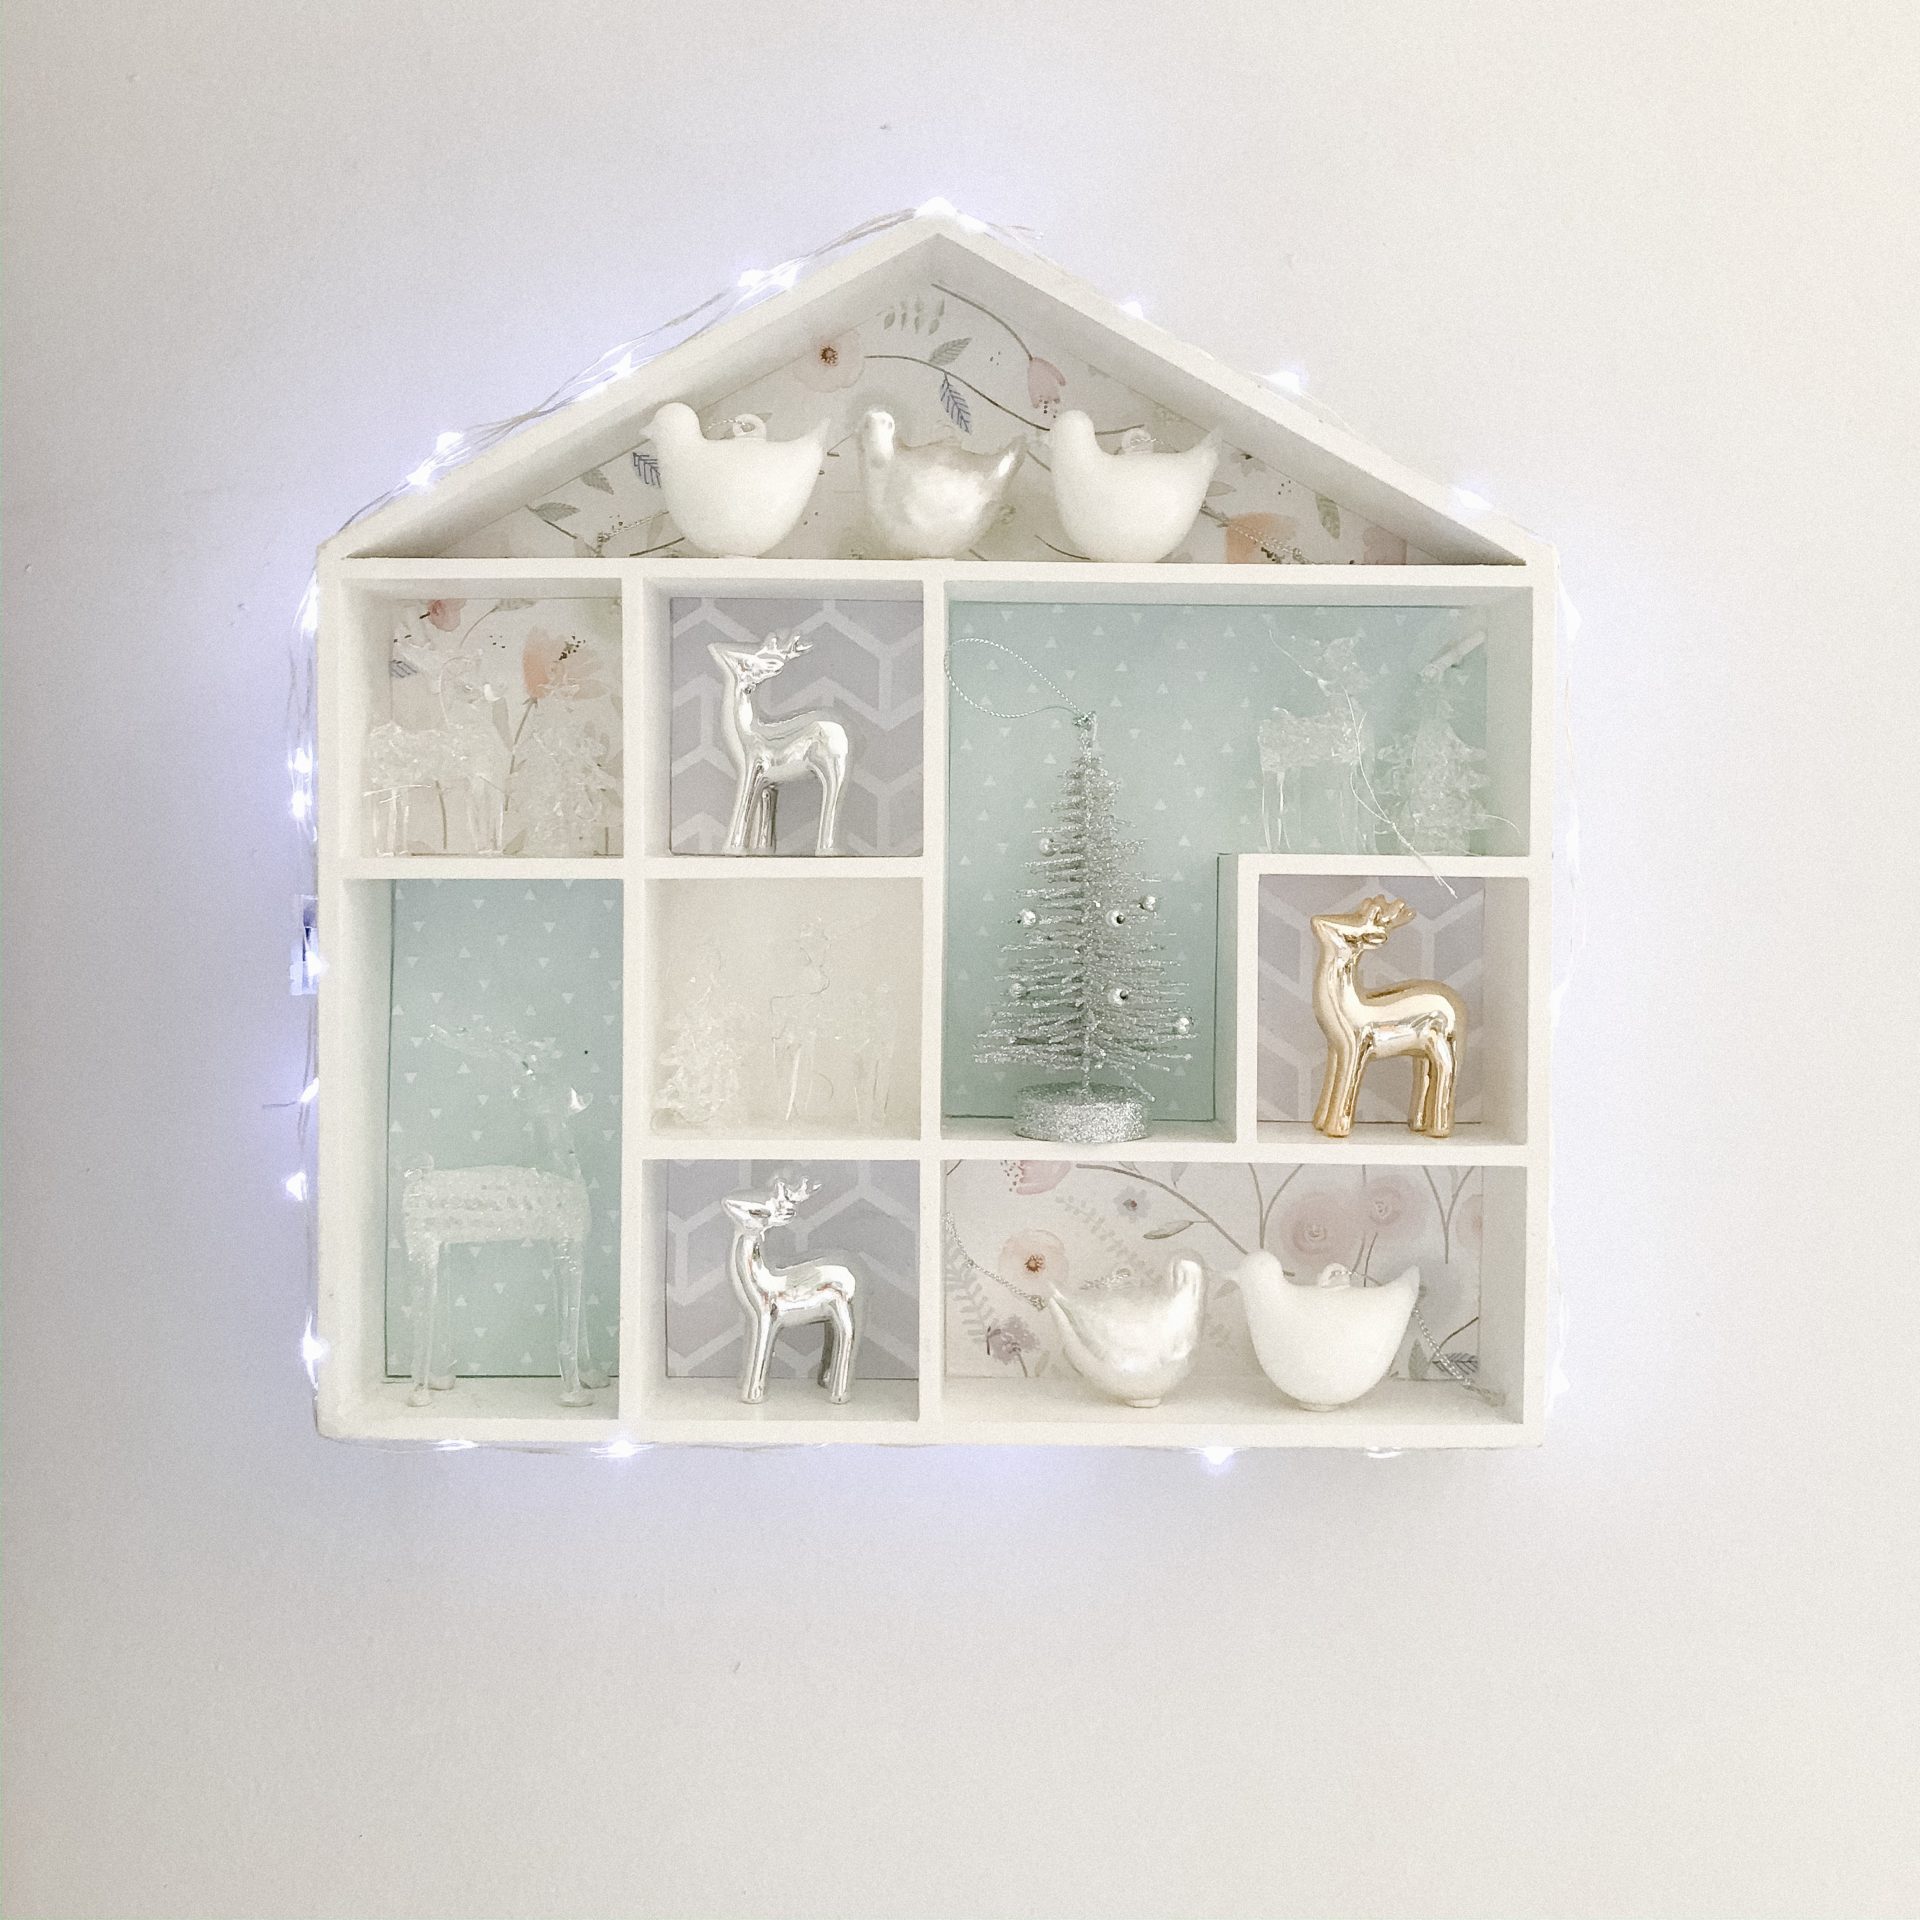 How to create a magical wall shelf for the most wonderful time of the year!